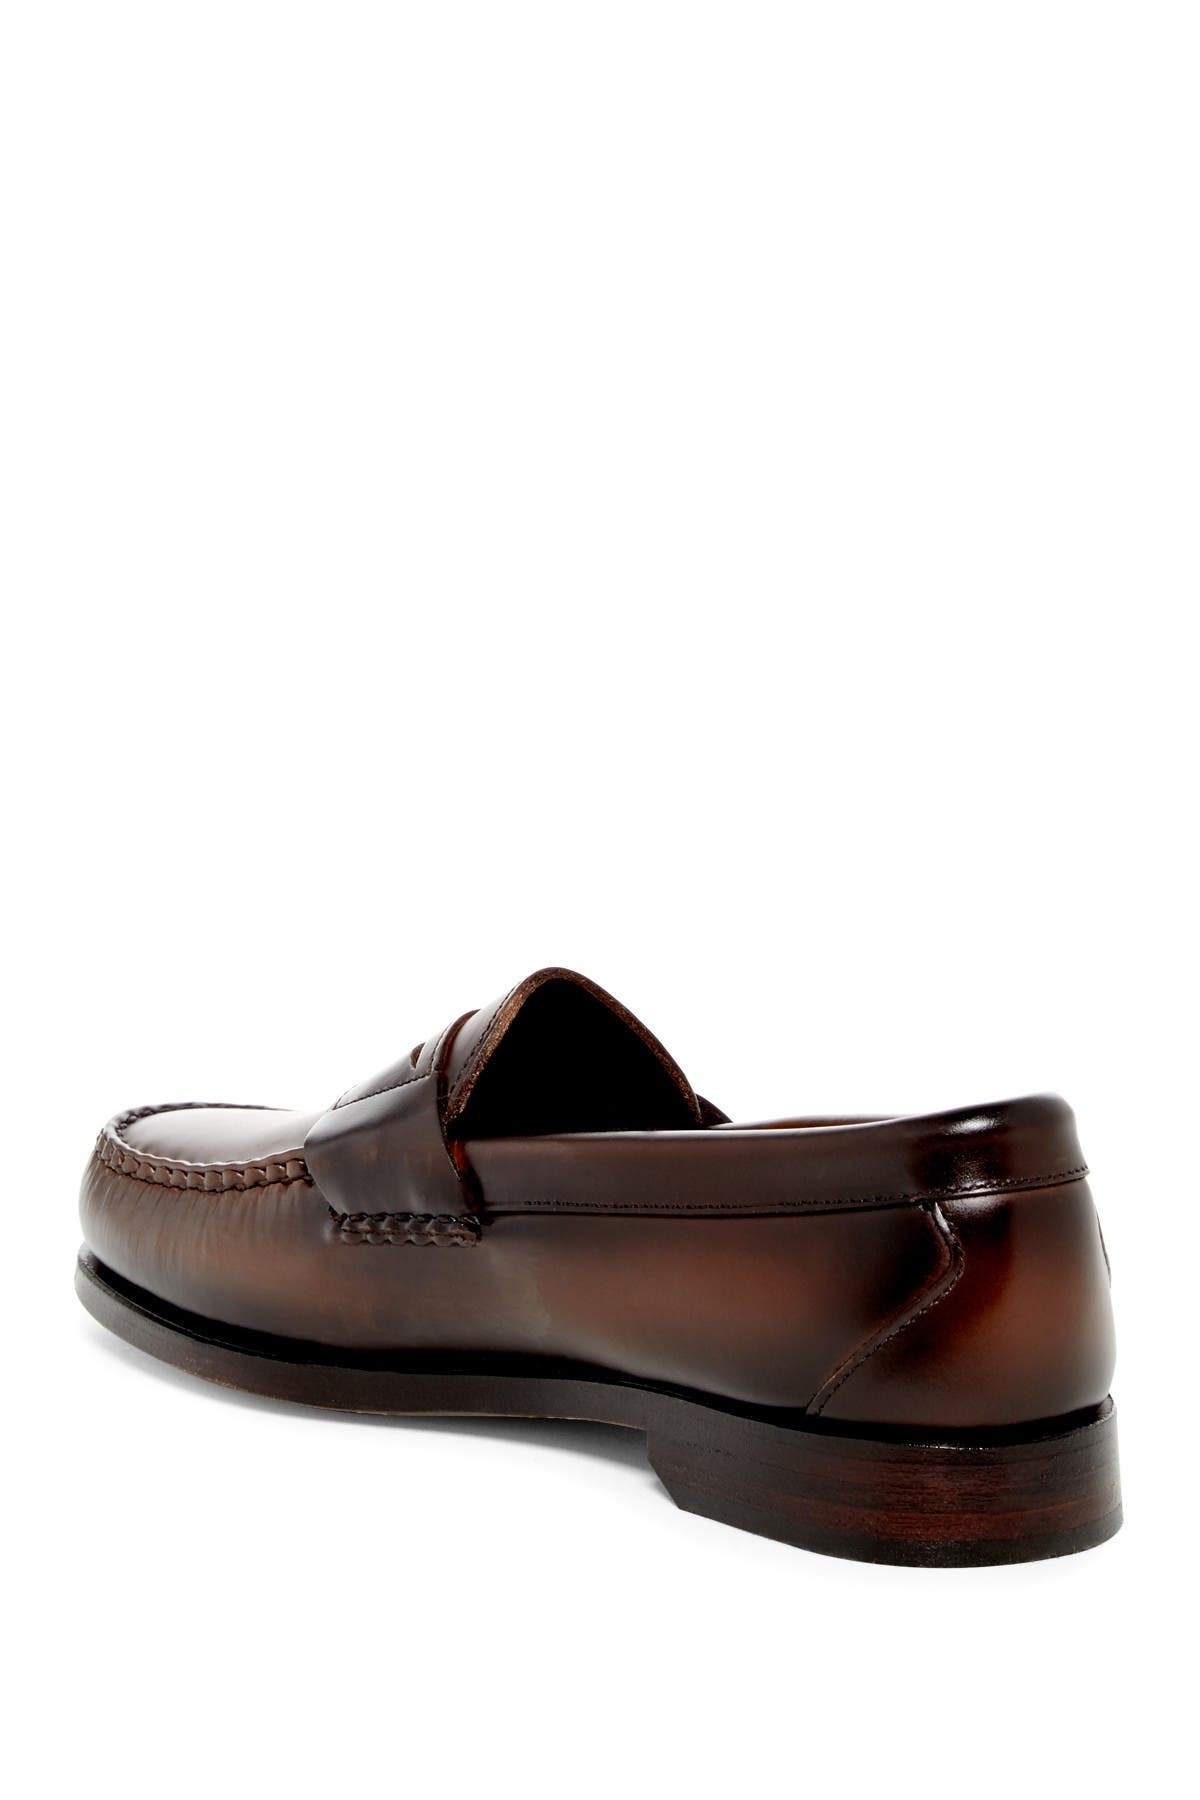 extra wide penny loafers